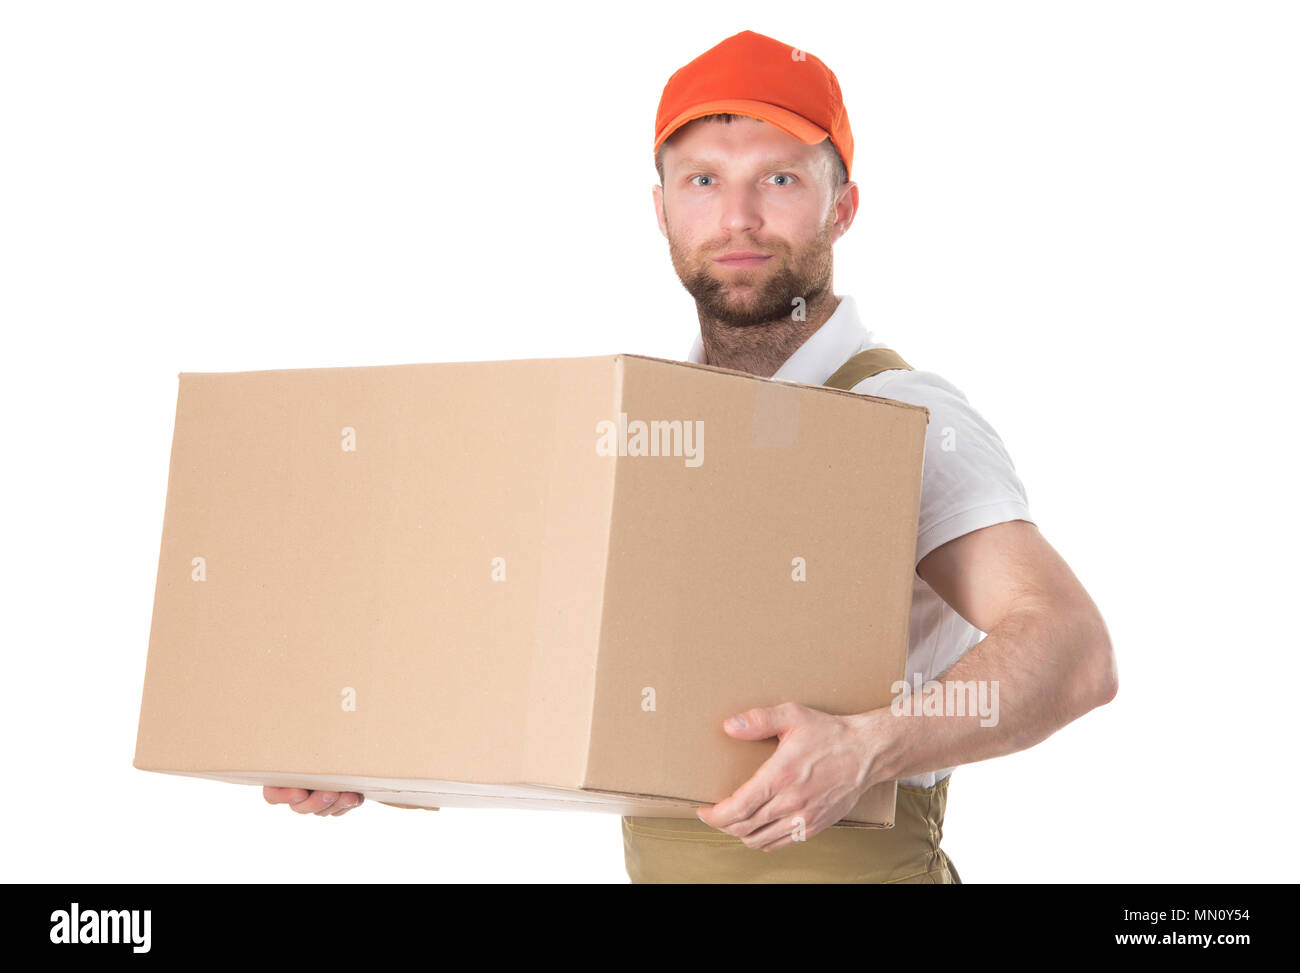 Goods delivery theme. Courier holding box isolated on white background. Stock Photo